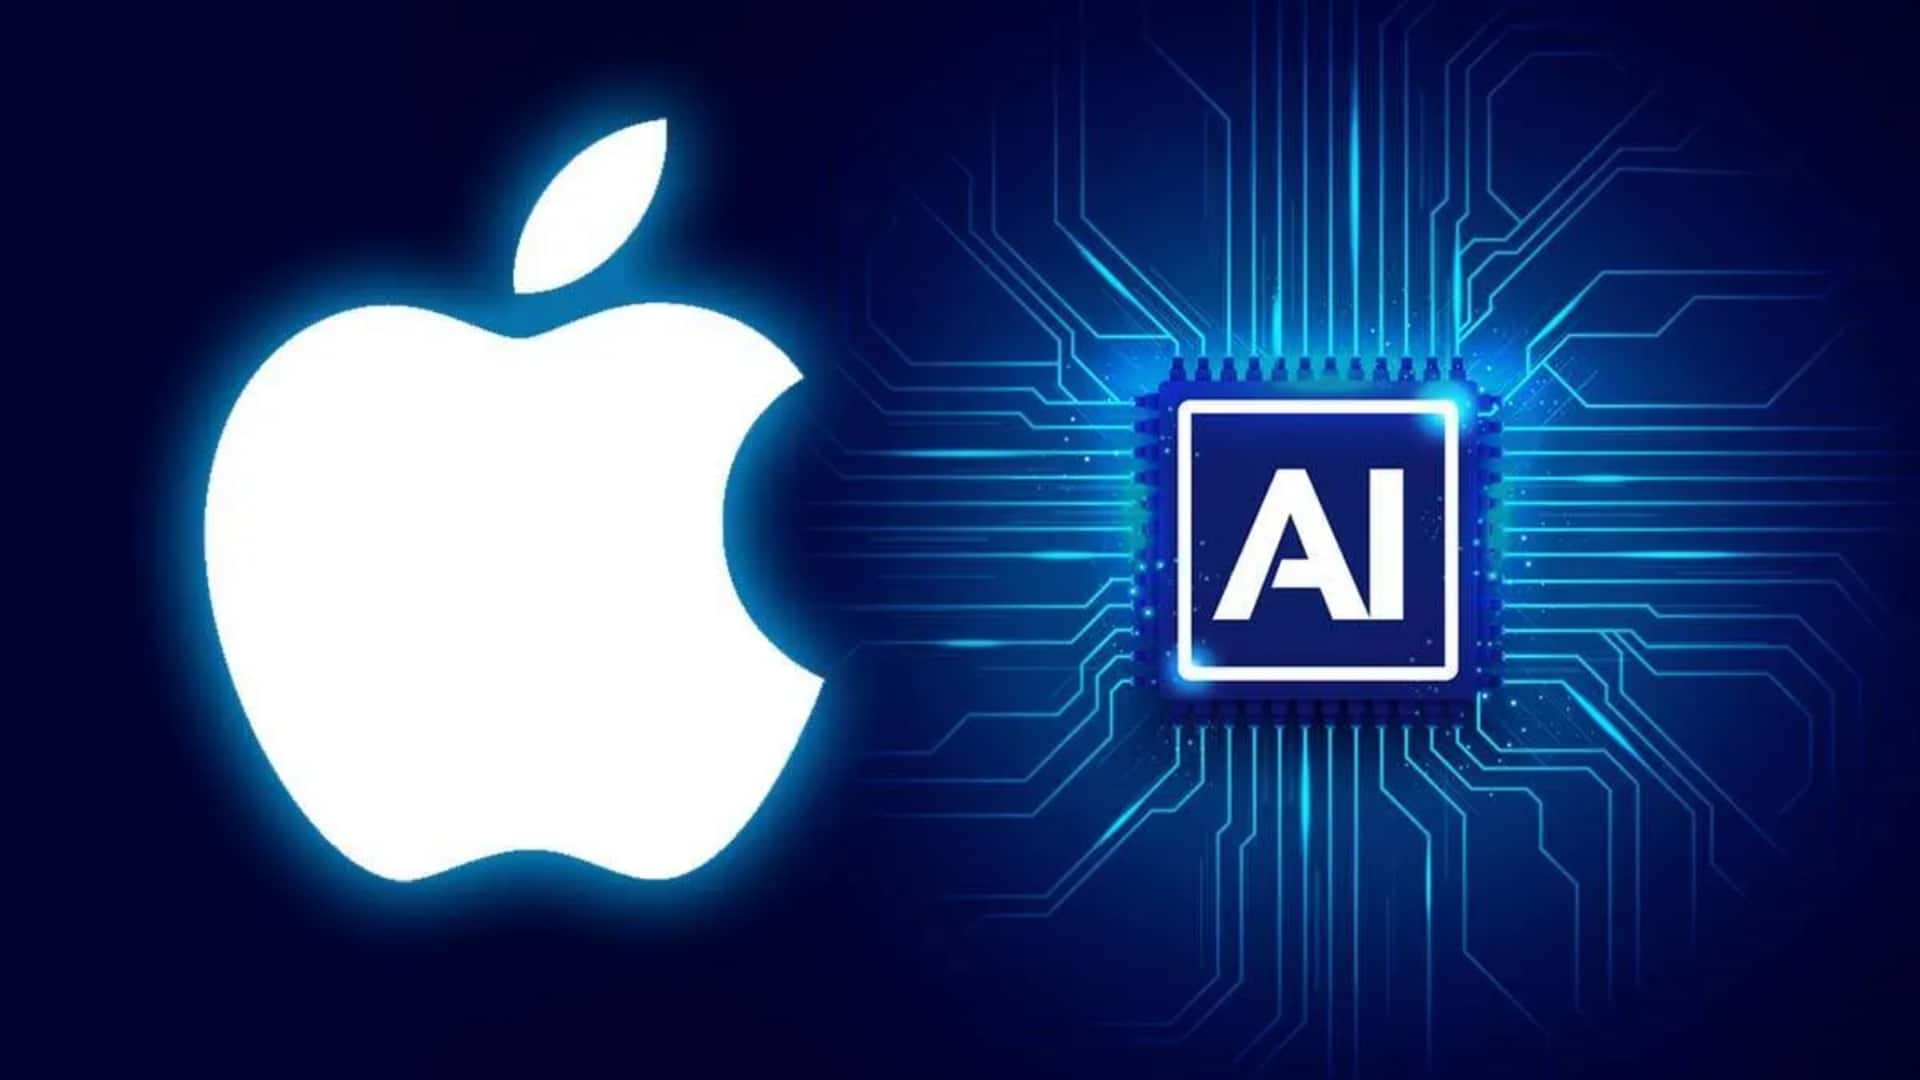 How Apple's new AI project could supercharge Siri